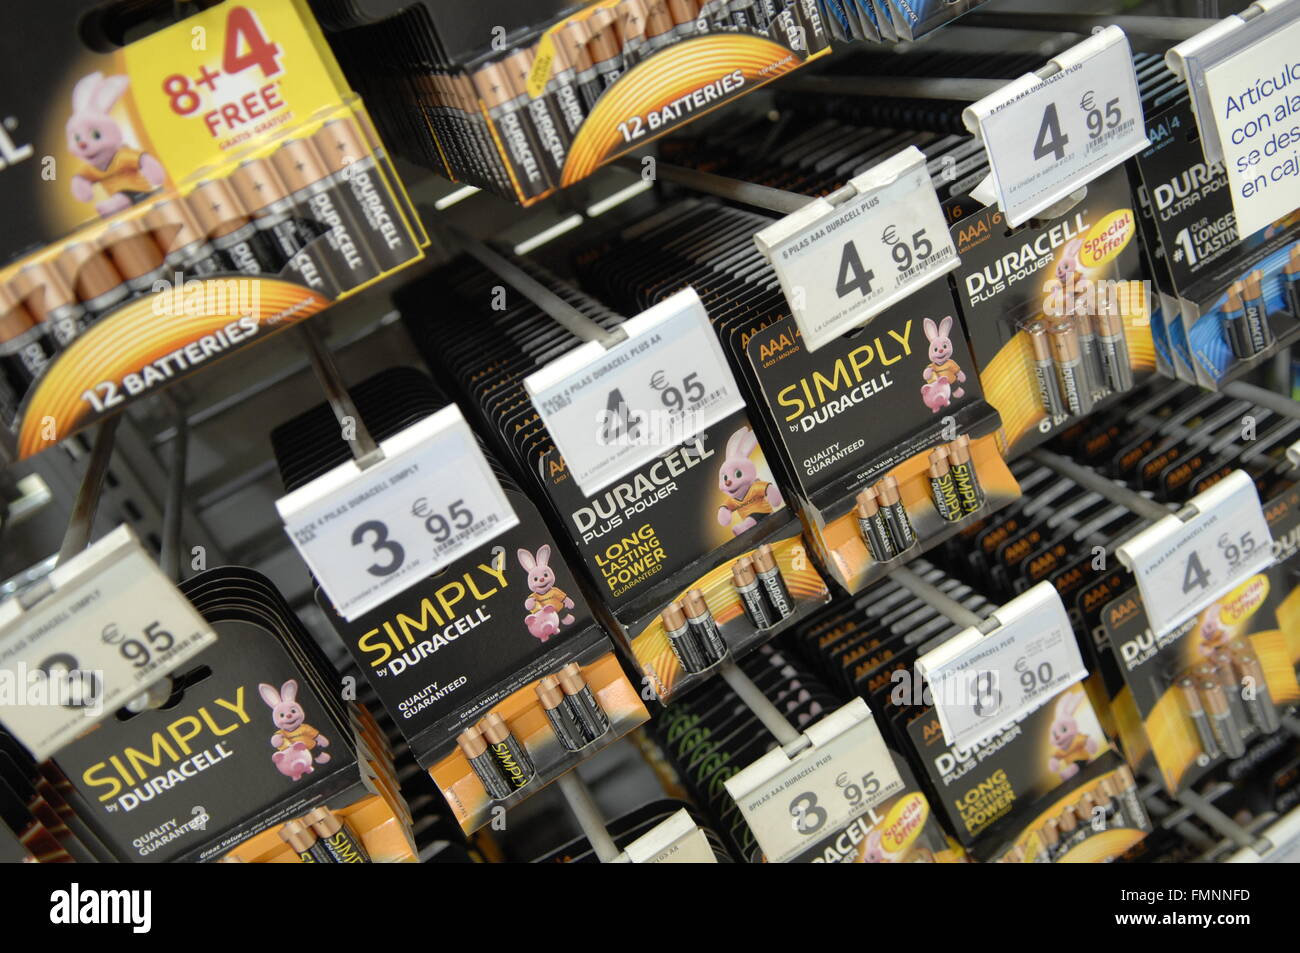 A close up image of Duracell batteries on display in a supermarket Stock Photo